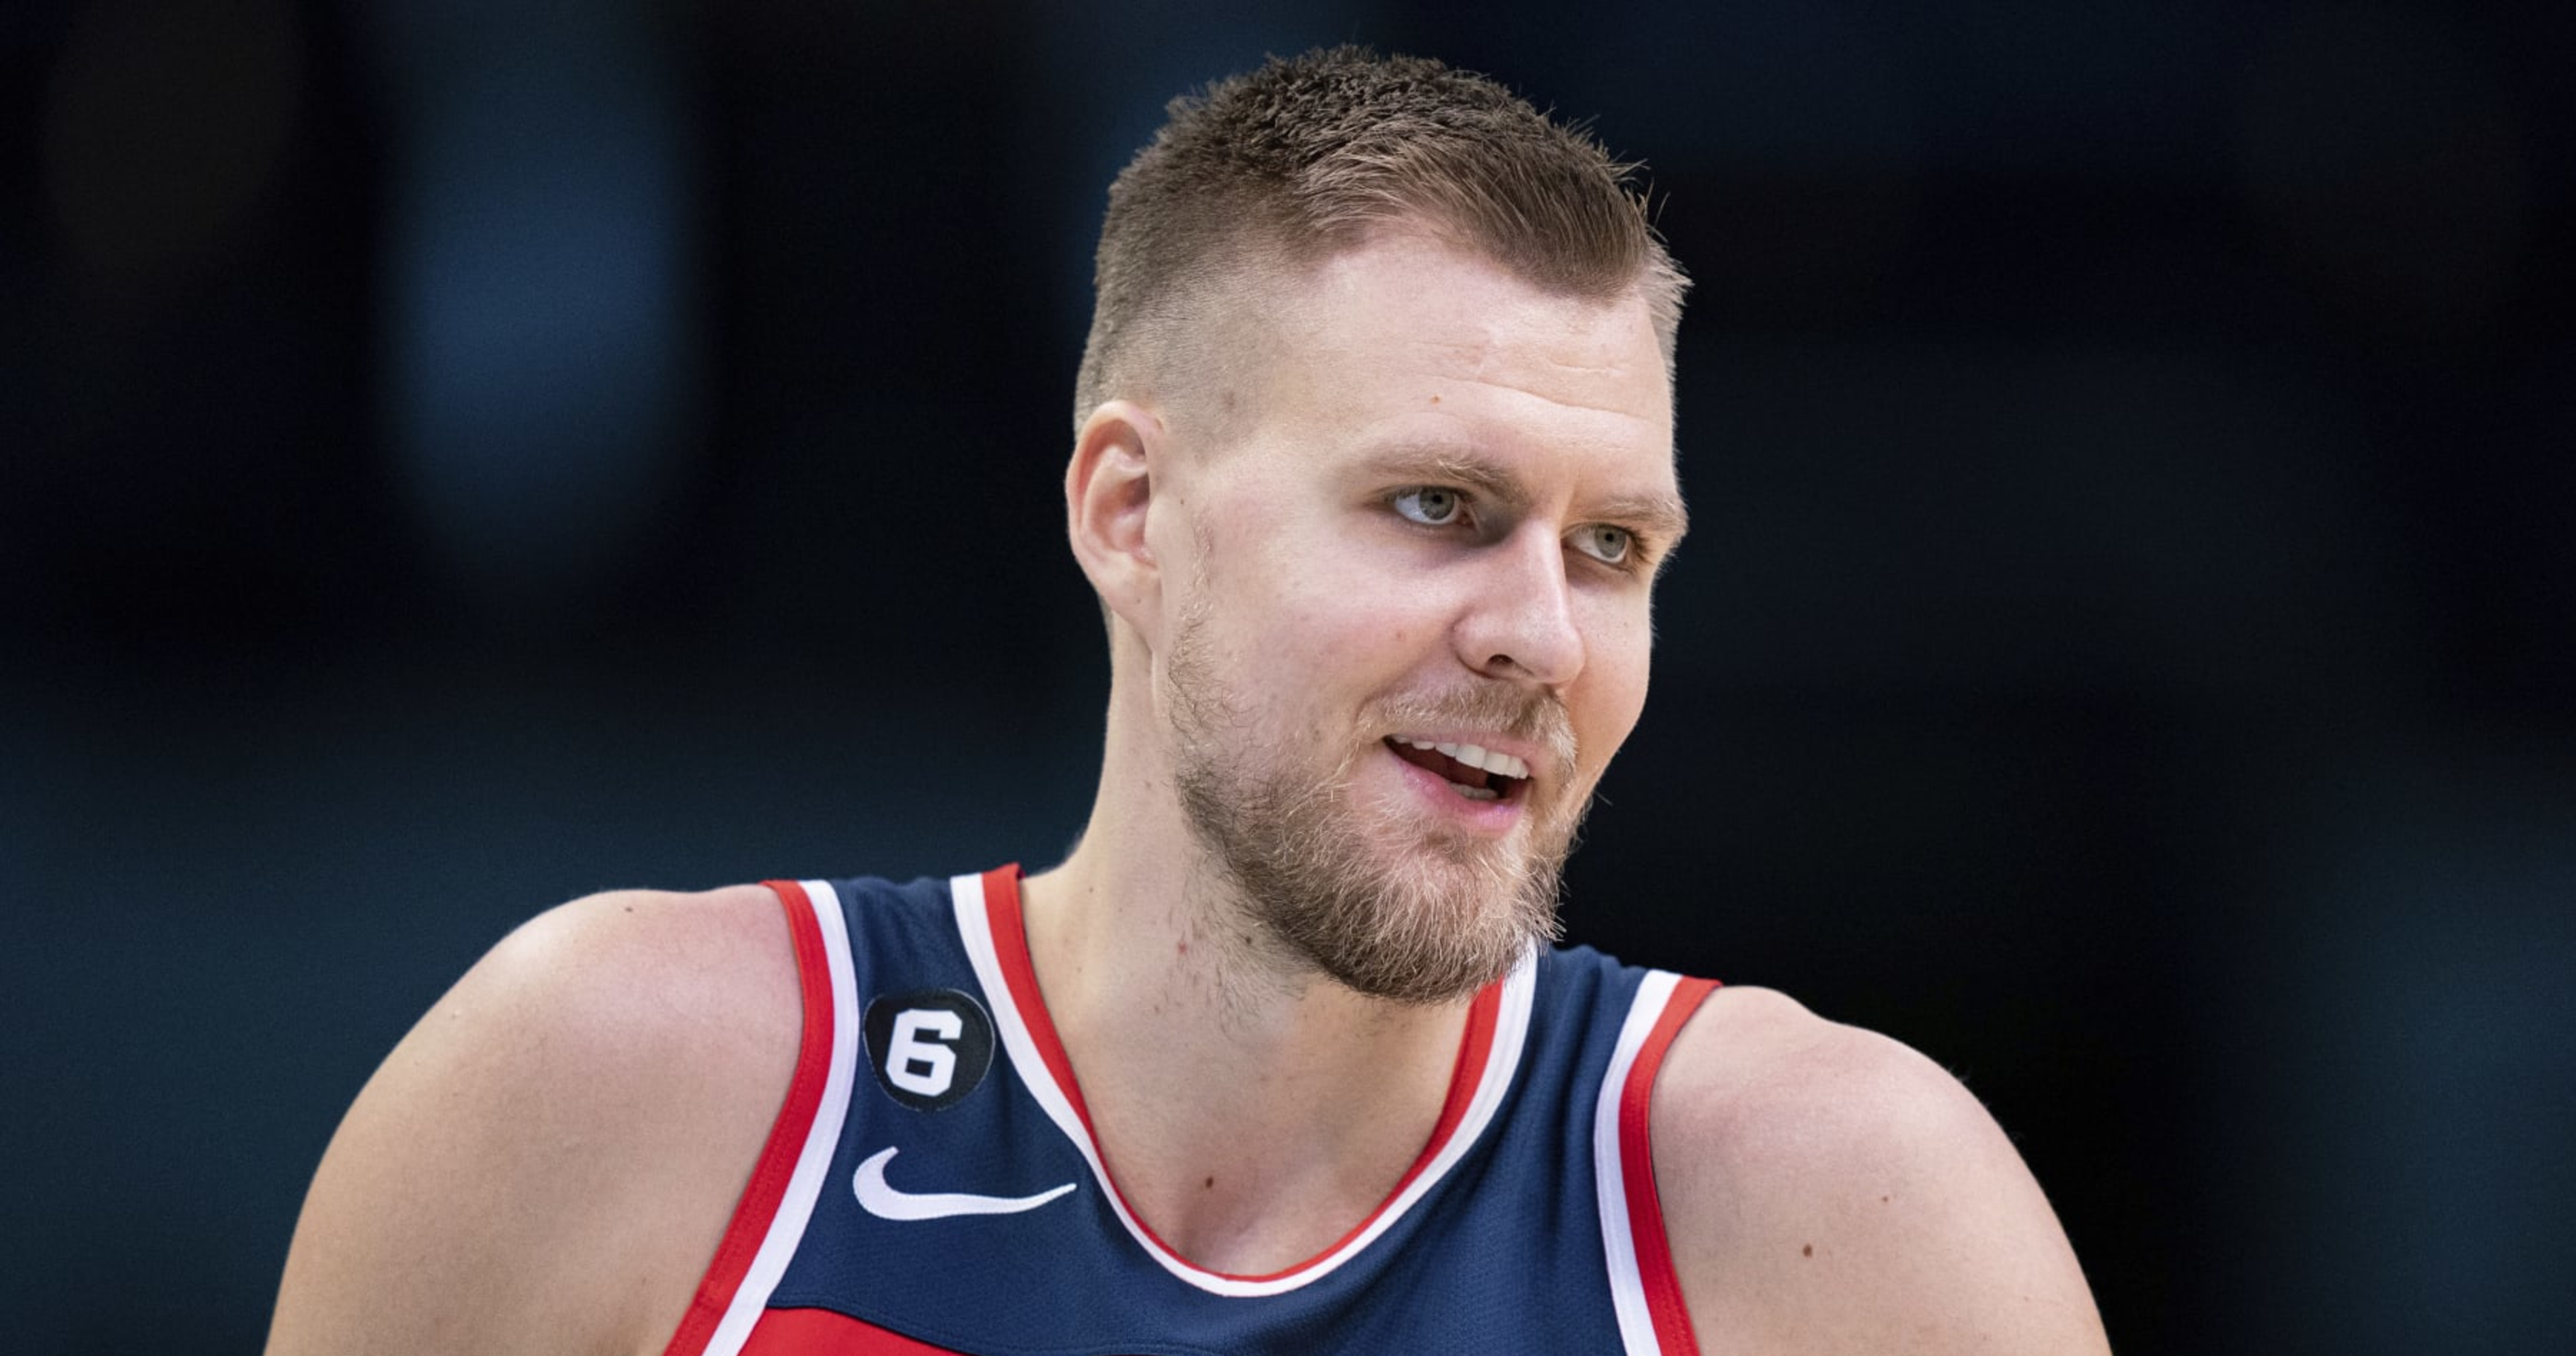 Kristaps Porzingis' Ankle Injury Appears to Be Minor, per Wizards' Wes